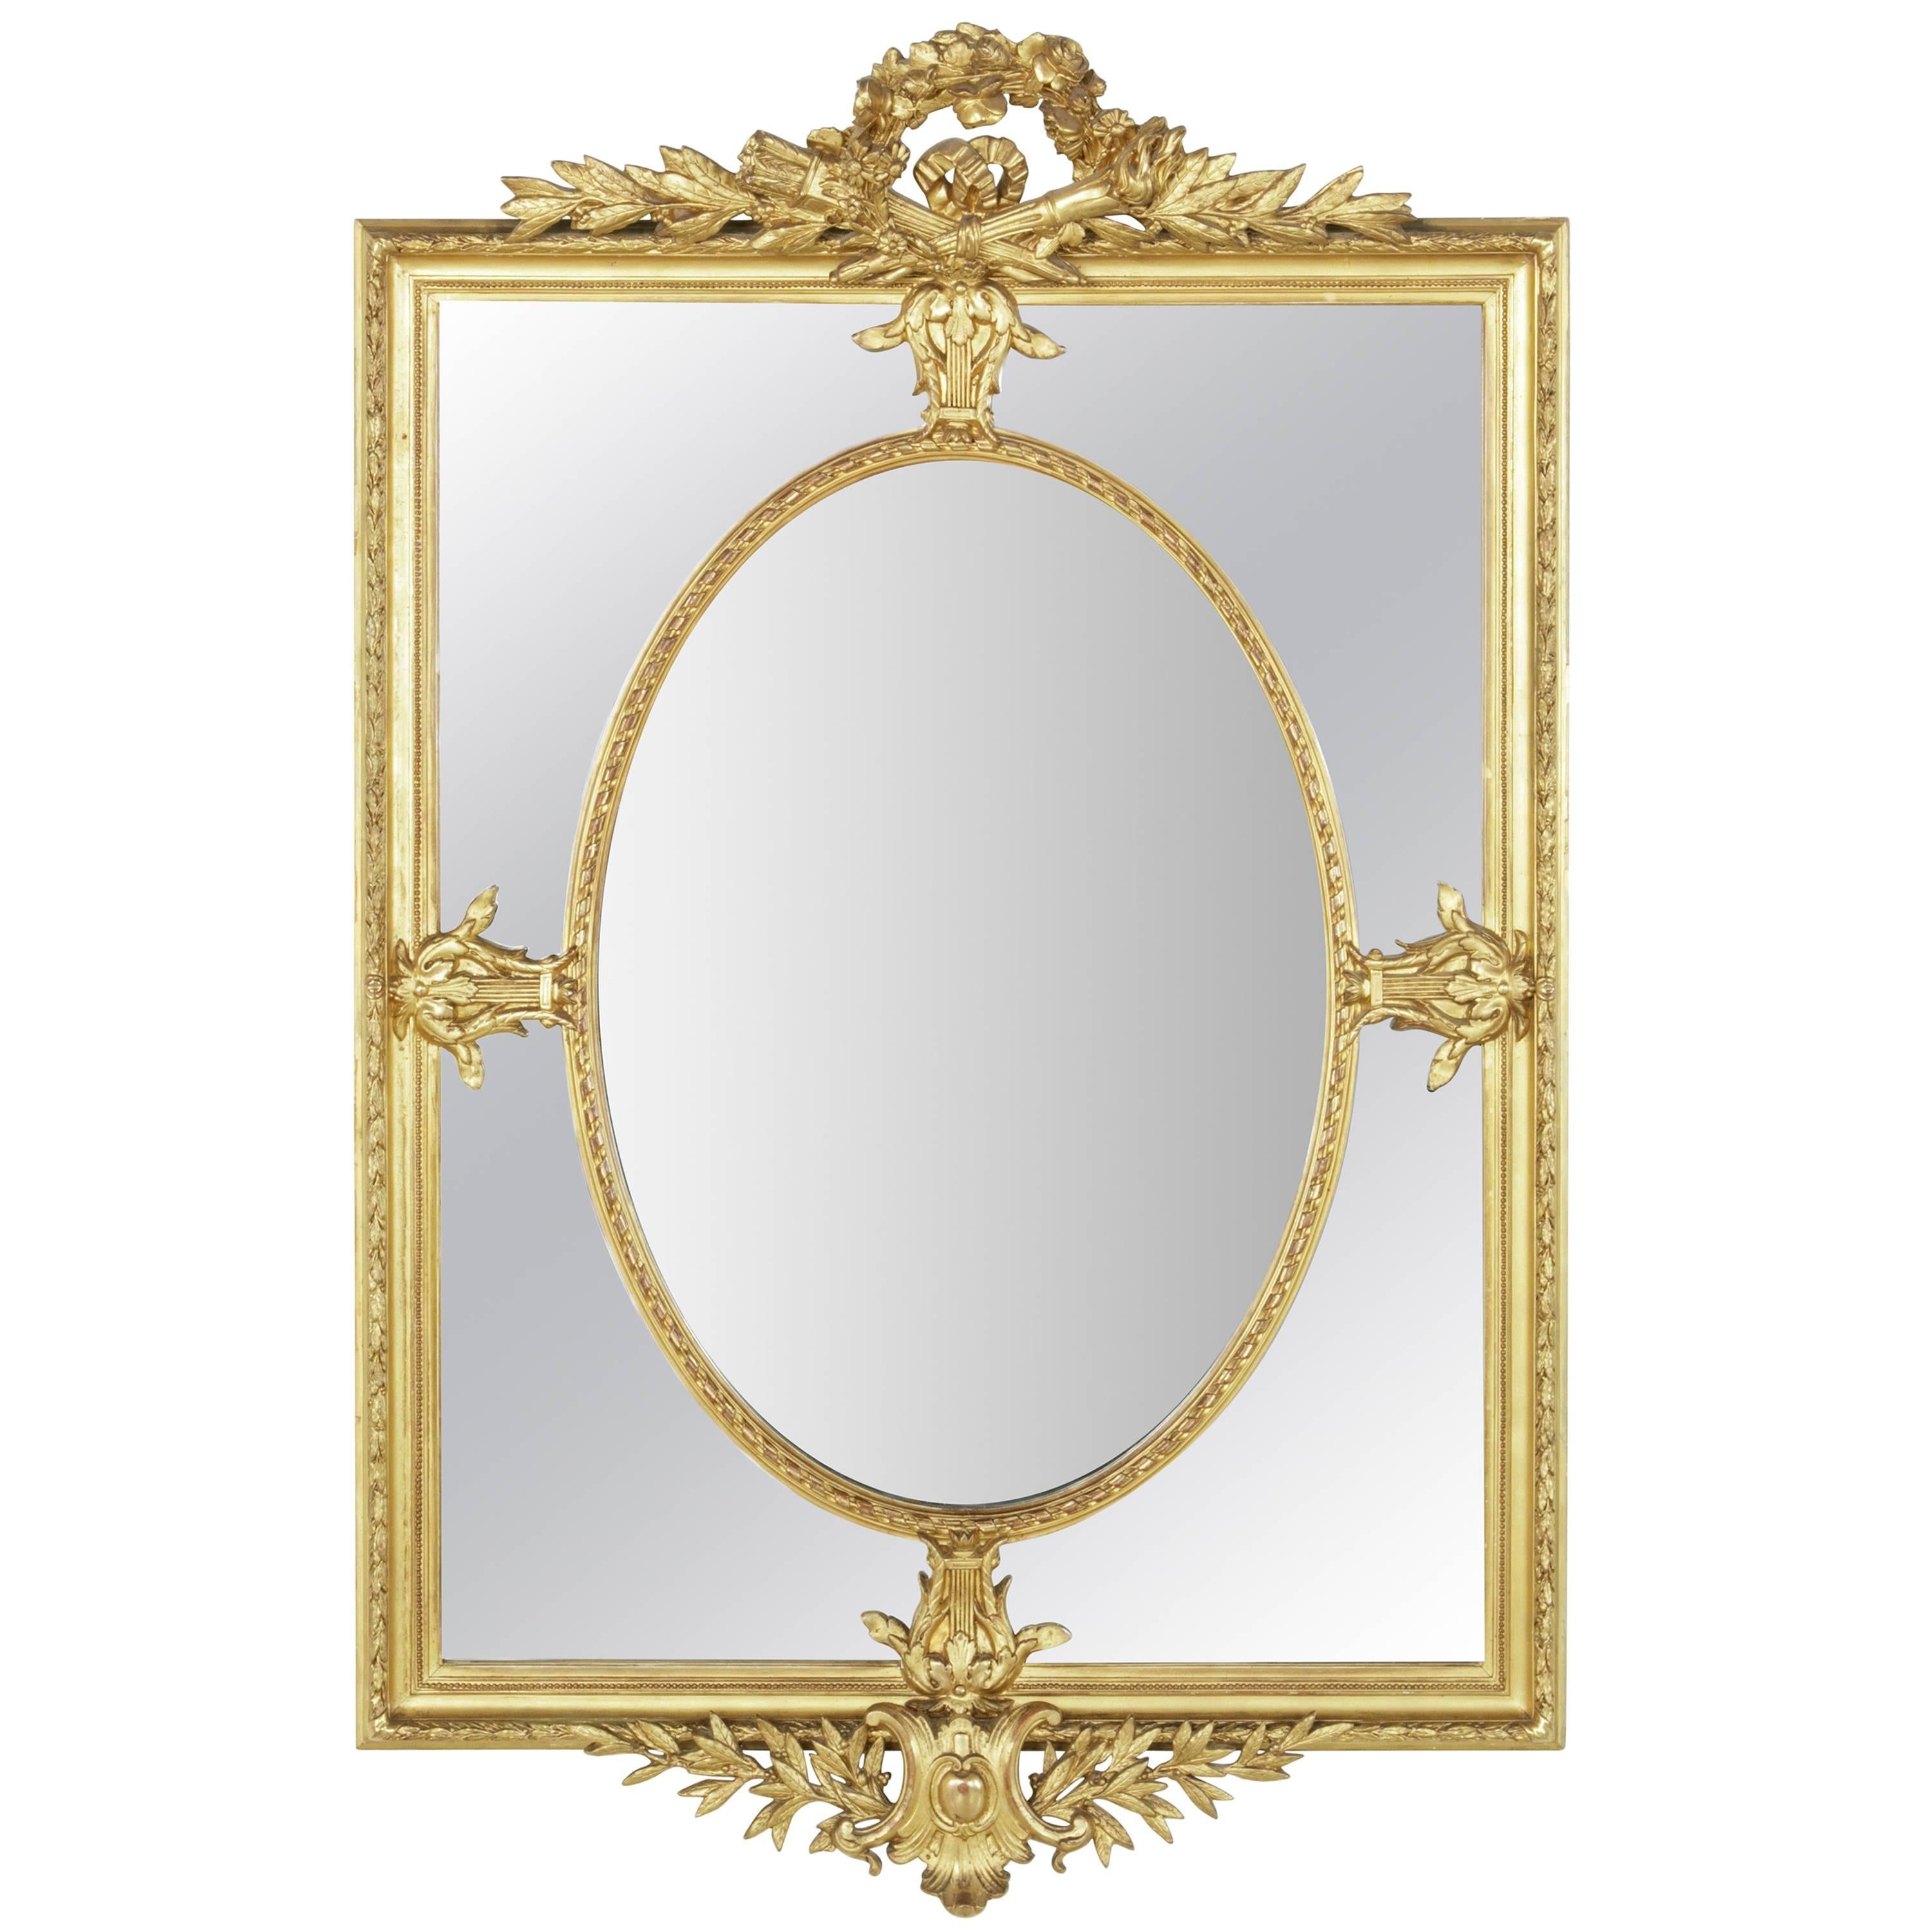 Large 19th Century Louis XVI Style Giltwood and Beveled Mirror with Inset Oval